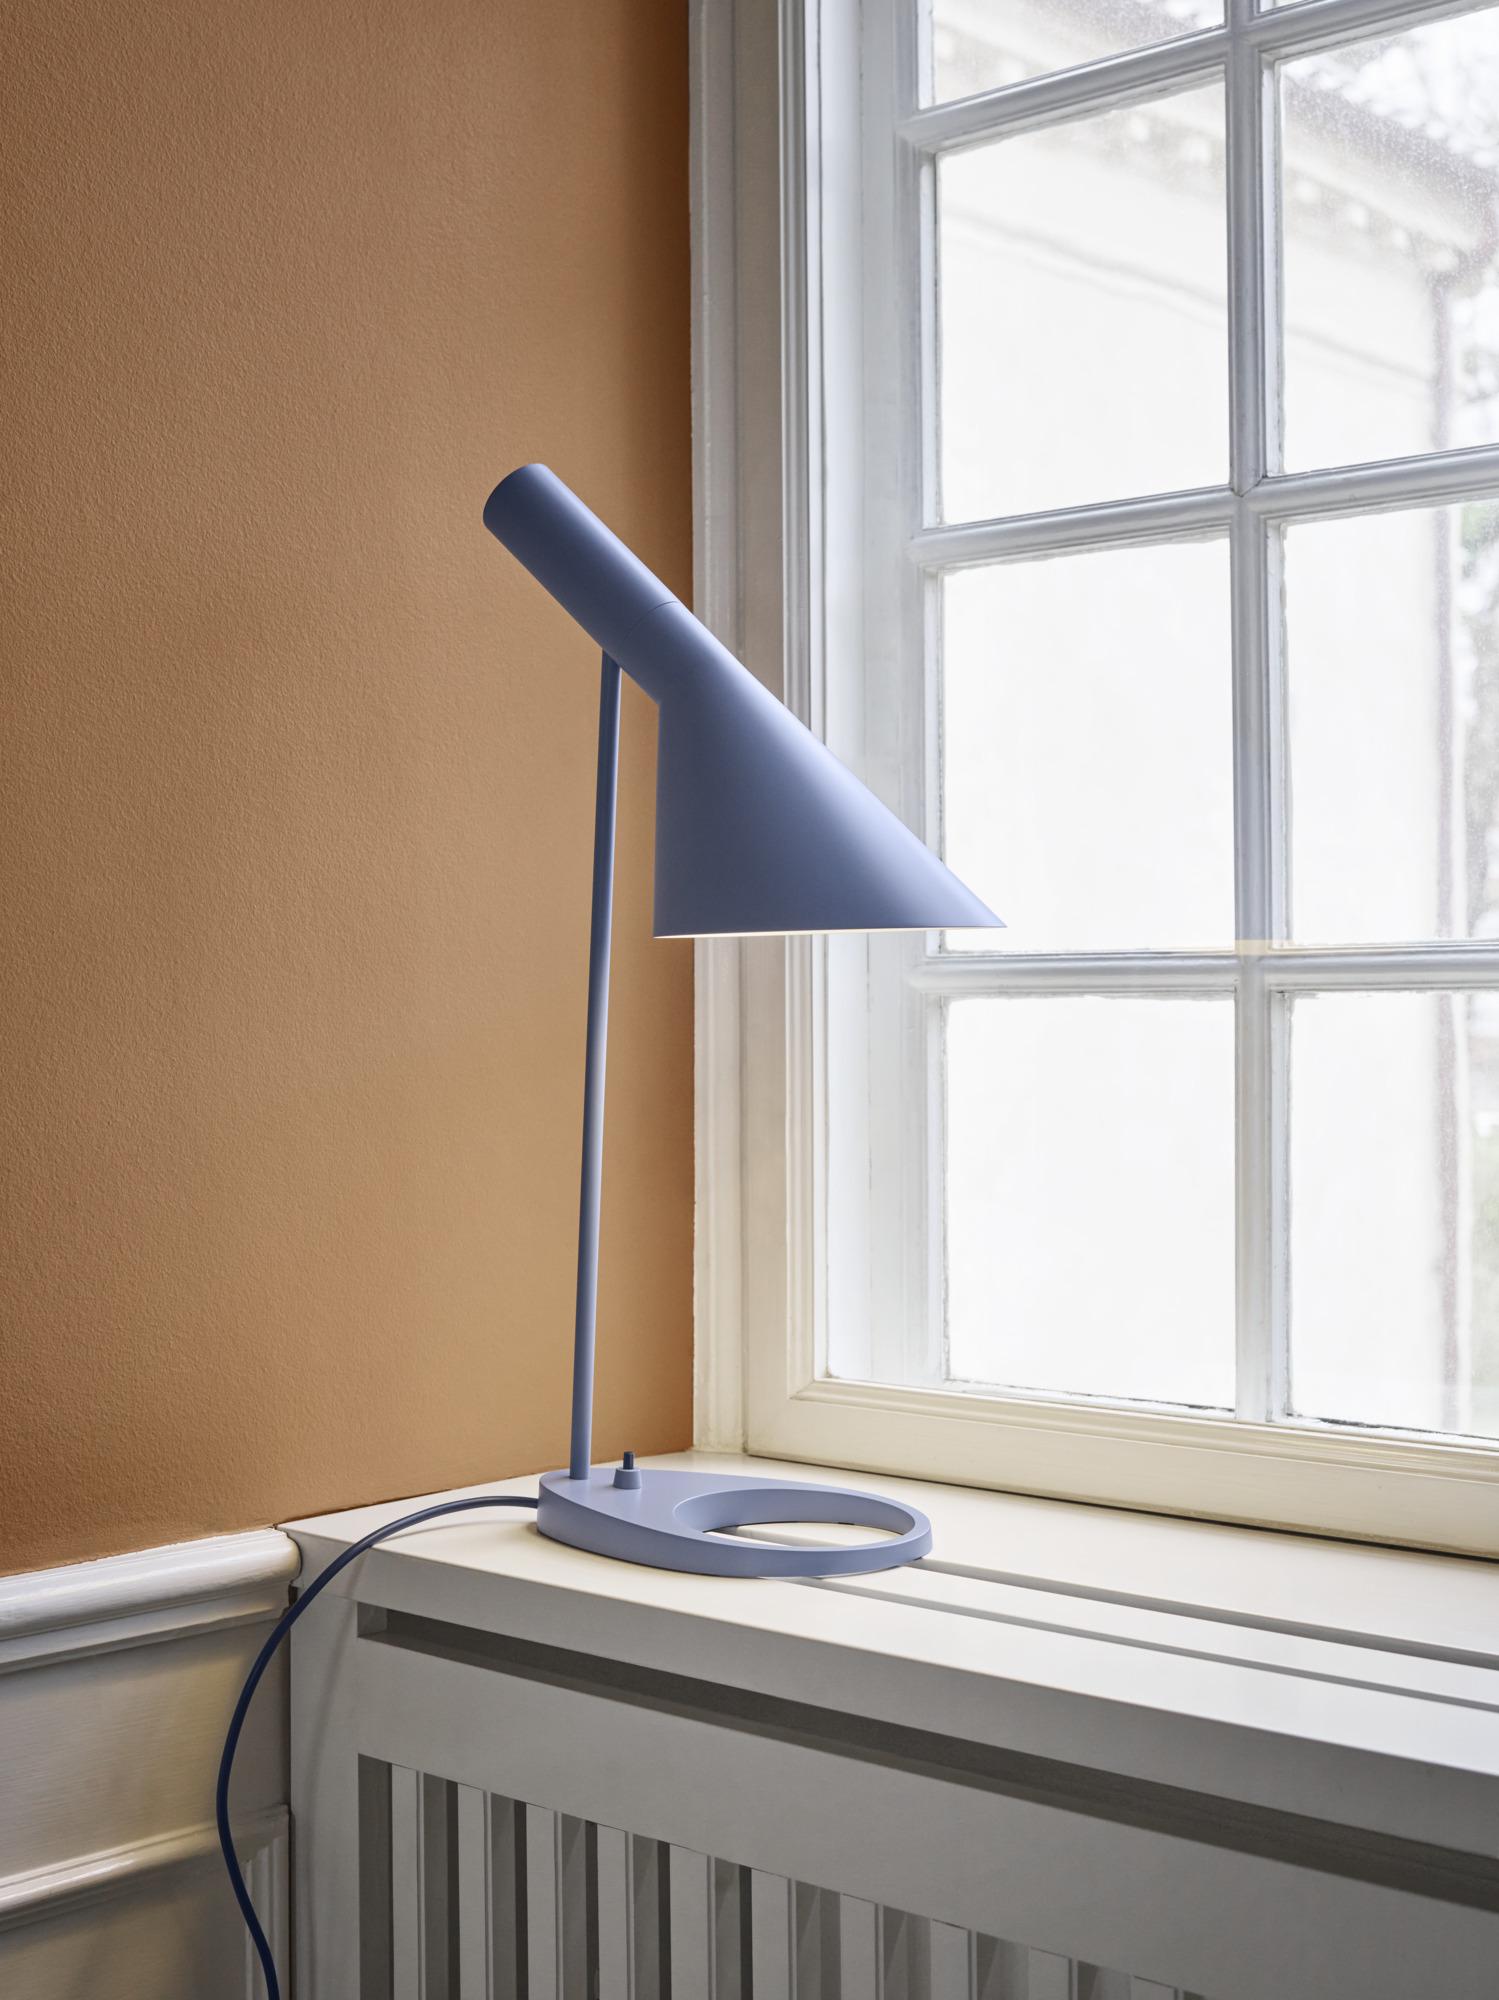 Arne Jacobsen AJ table lamp in Dusty Blue for Louis Poulsen. 

The AJ series was part of the lighting collection renowned Danish designer Arne Jacobsen created for the original SAS Royal Hotel in 1957. Today, his furniture and lighting designs are